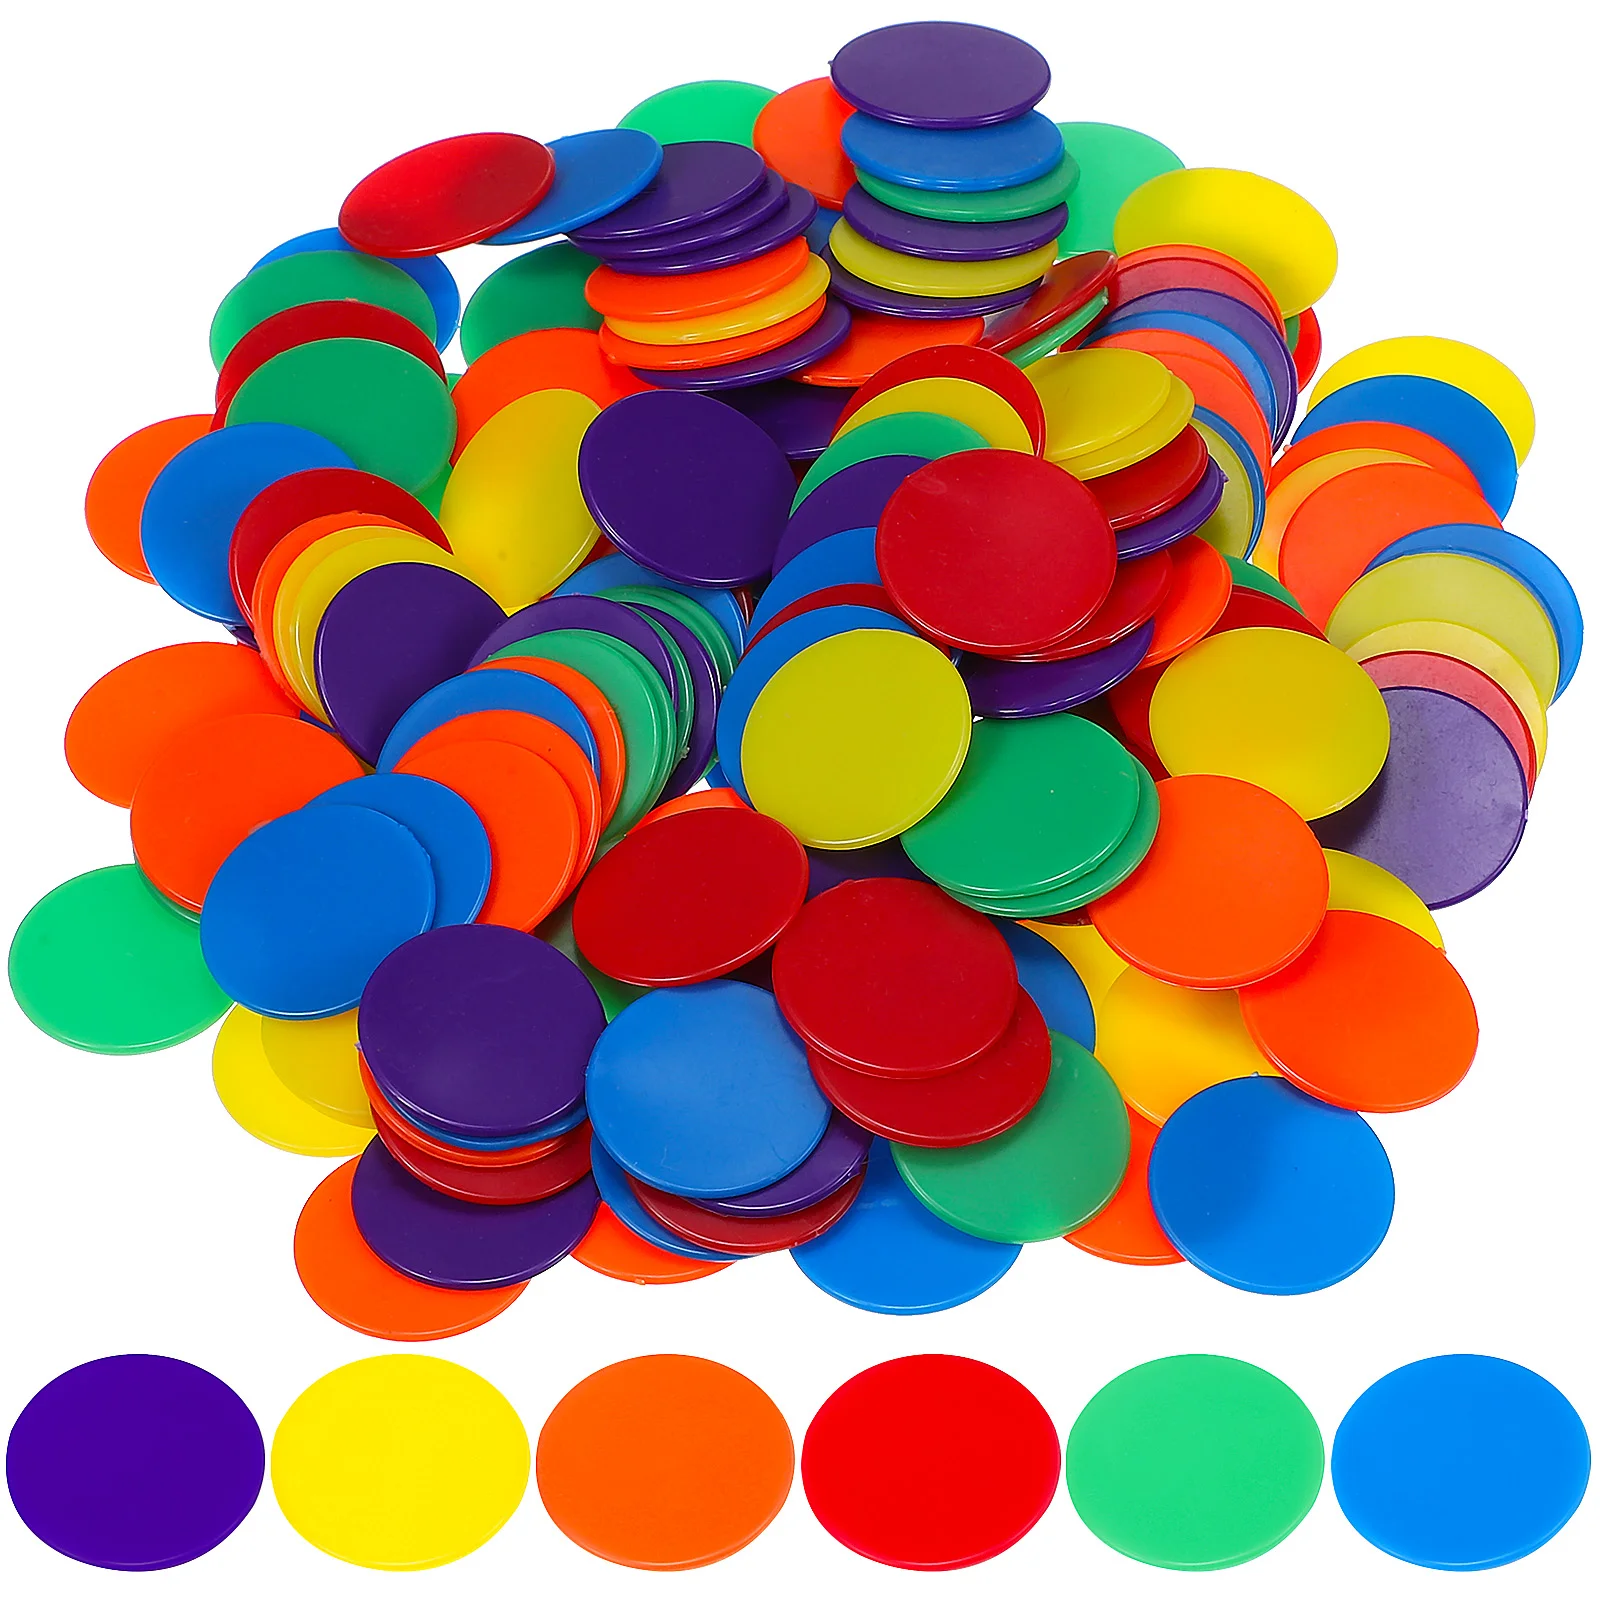 

180pcs Counting Chips Chips Poker Chips Poker Cards Game Chips Party Games Counting Discs Markers